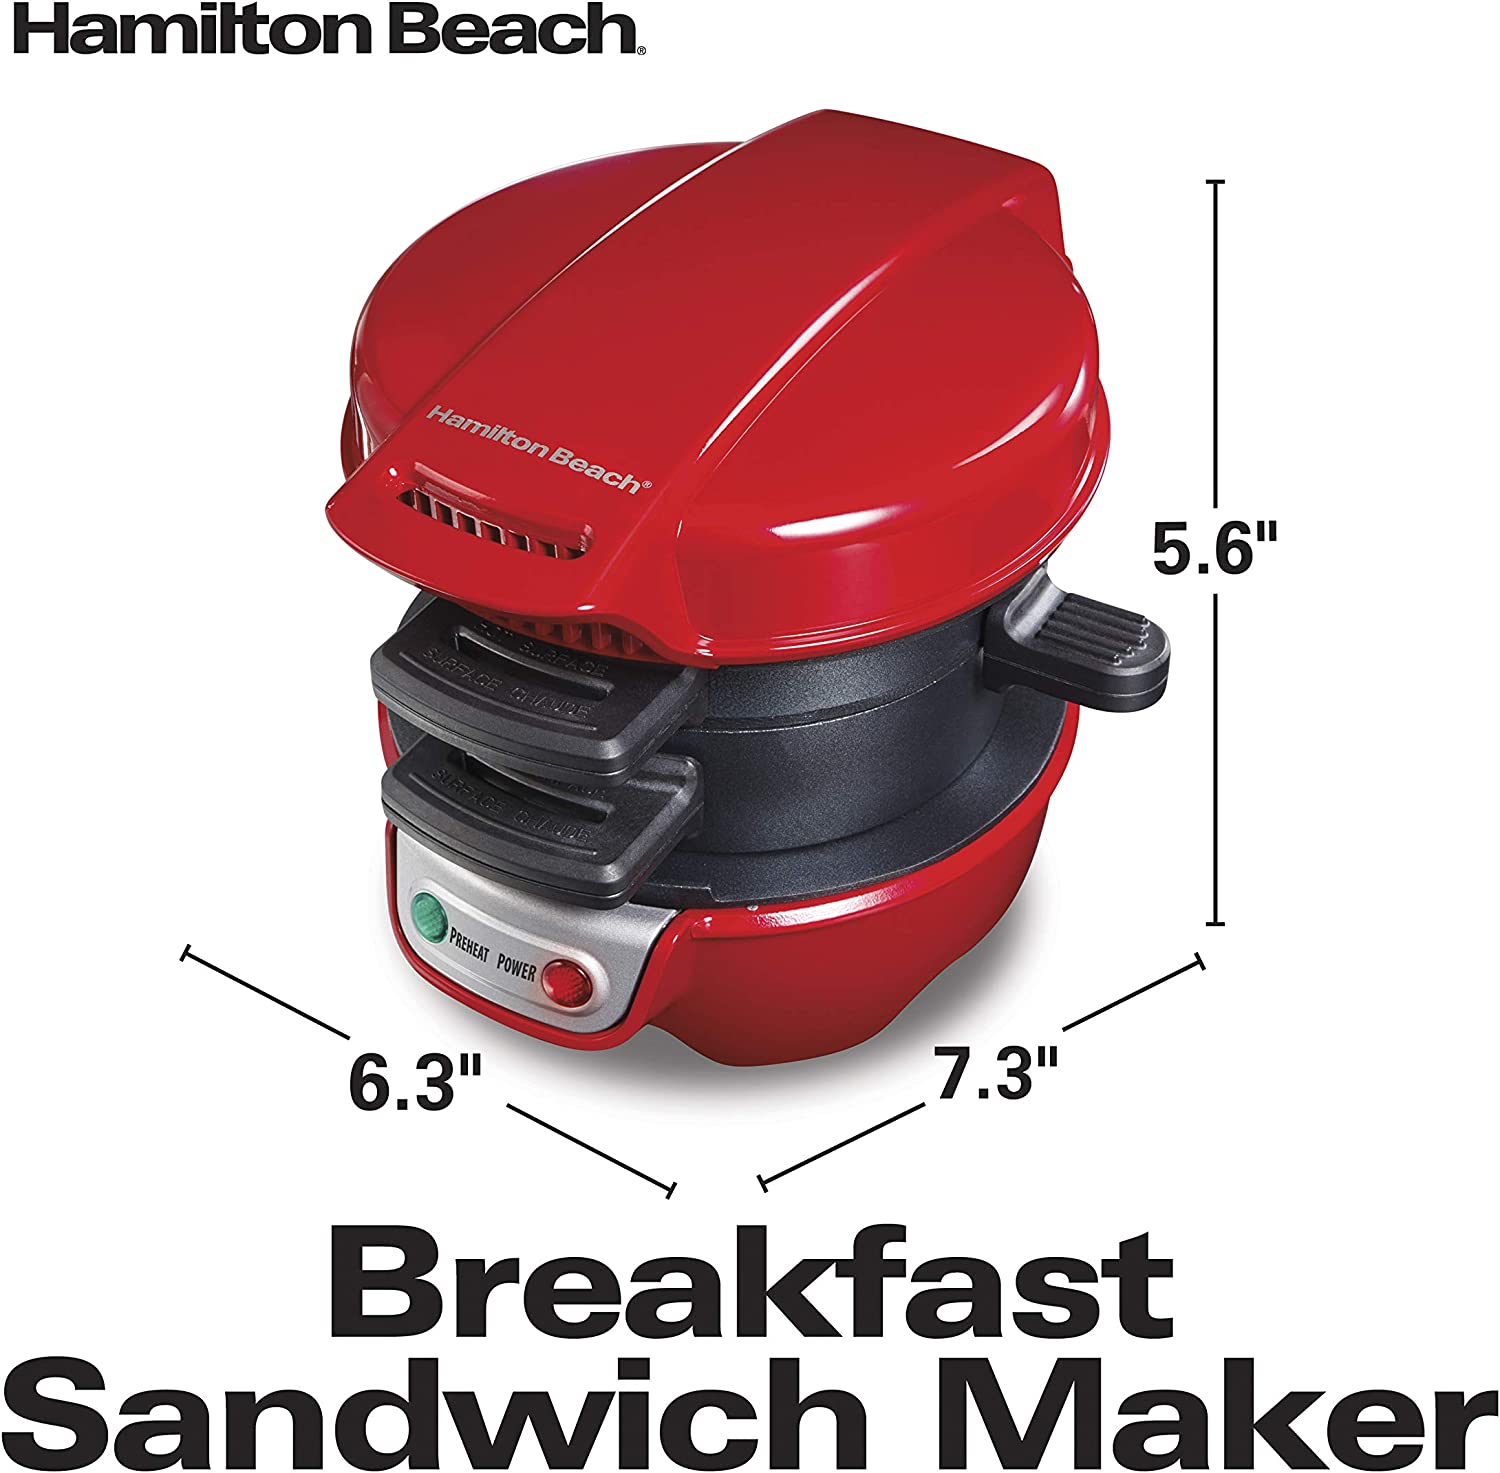  Hamilton Beach Breakfast Sandwich Maker with Egg Cooker Ring,  Customize Ingredients, Perfect for English Muffins, Croissants, Mini  Waffles, Single & Dual Breakfast Sandwich Maker, Silver: Home & Kitchen